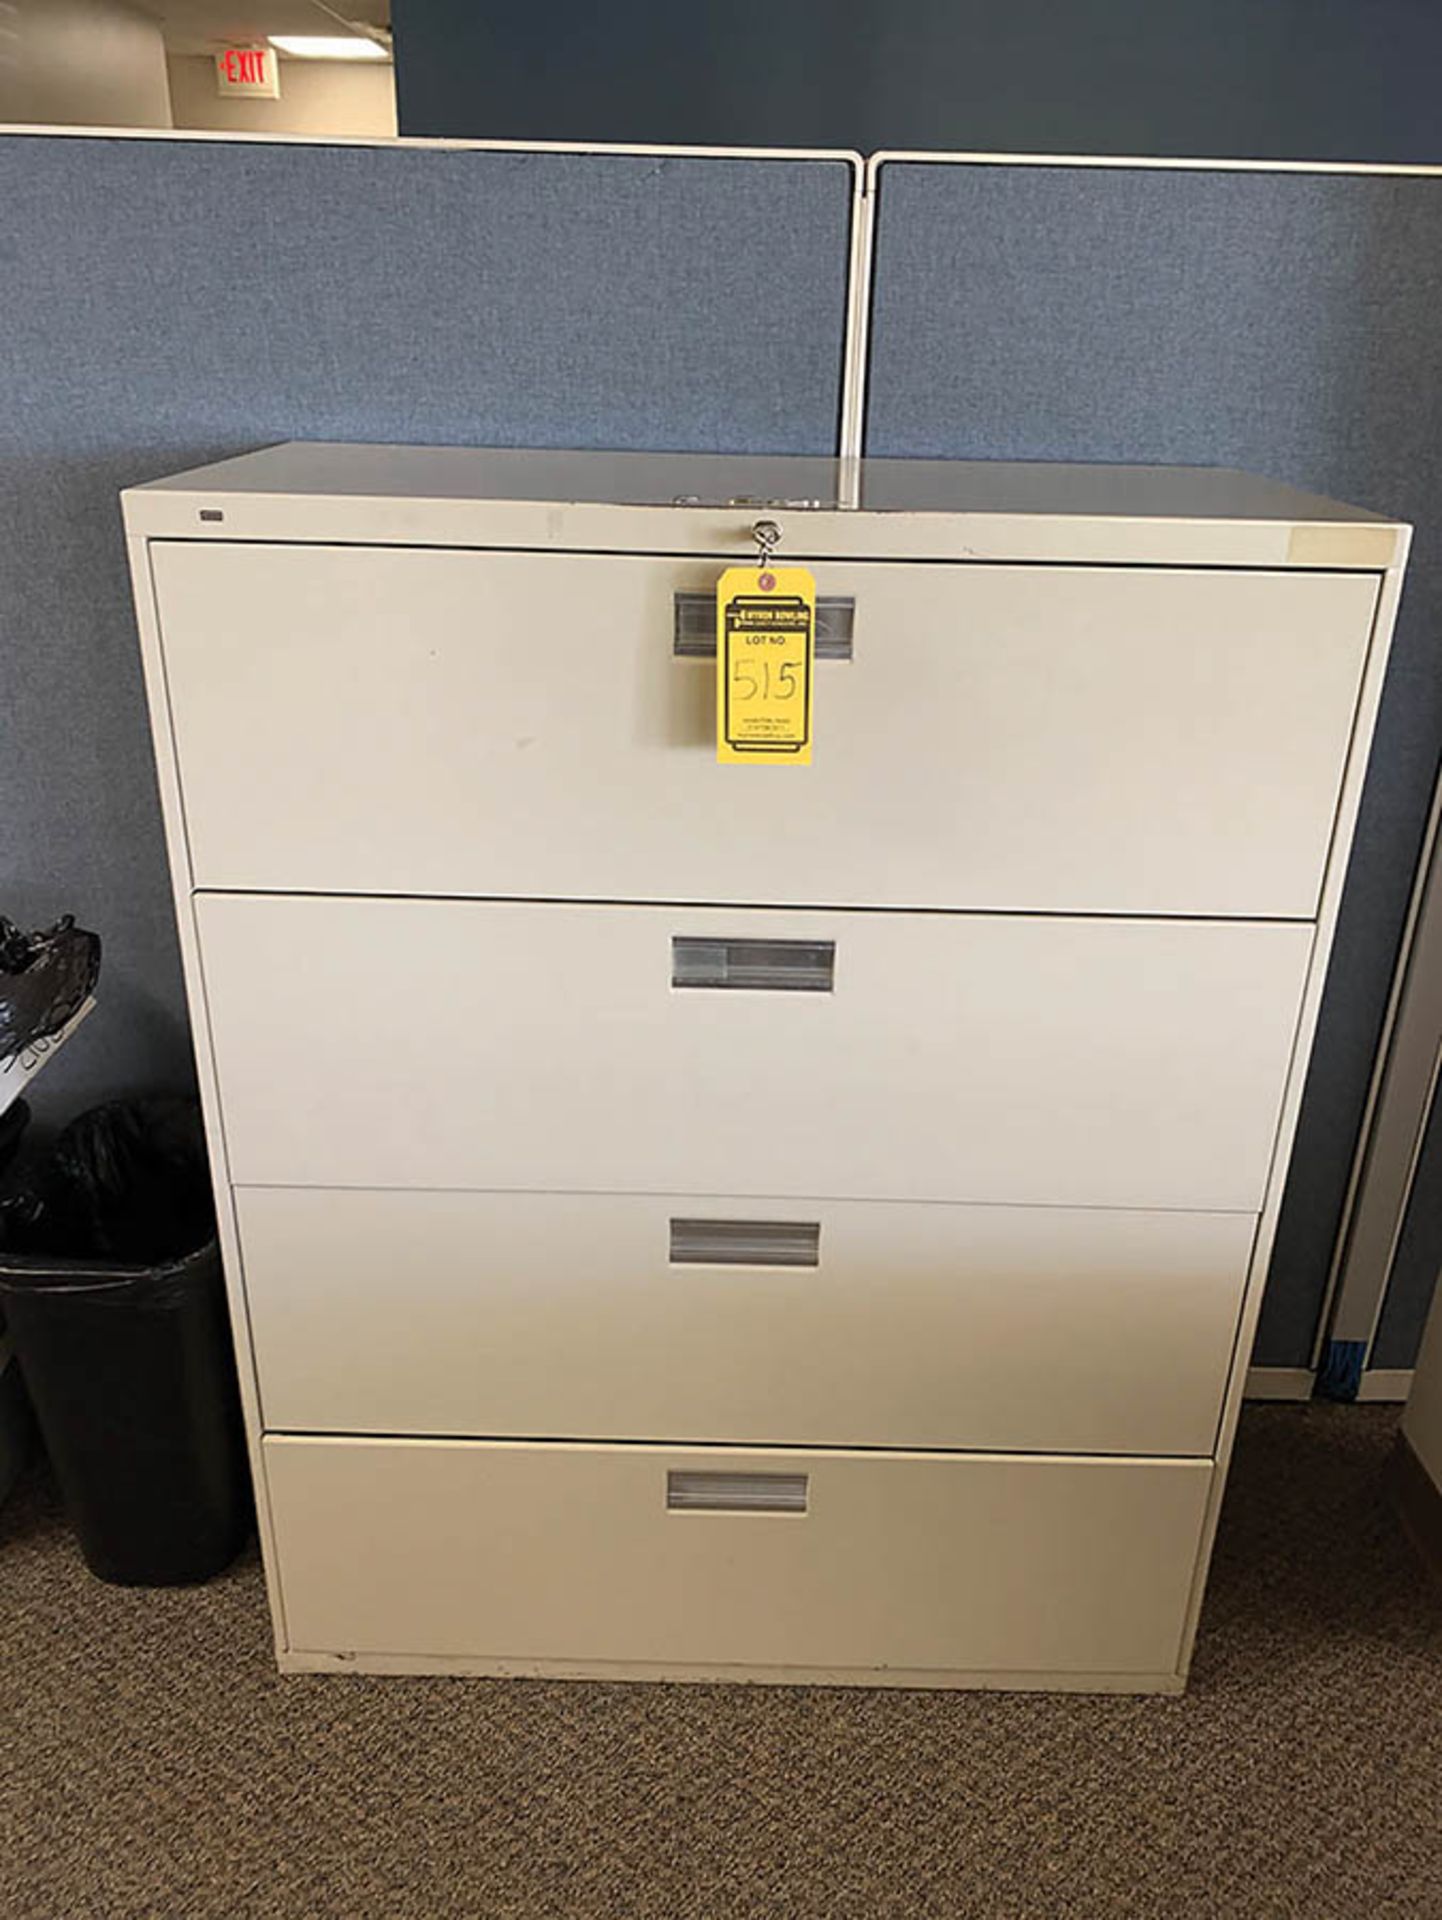 (3) 3-DRAWER FILING CABINETS WITH CONTENTS AND (1) 4-DRAWER FILING CABINET